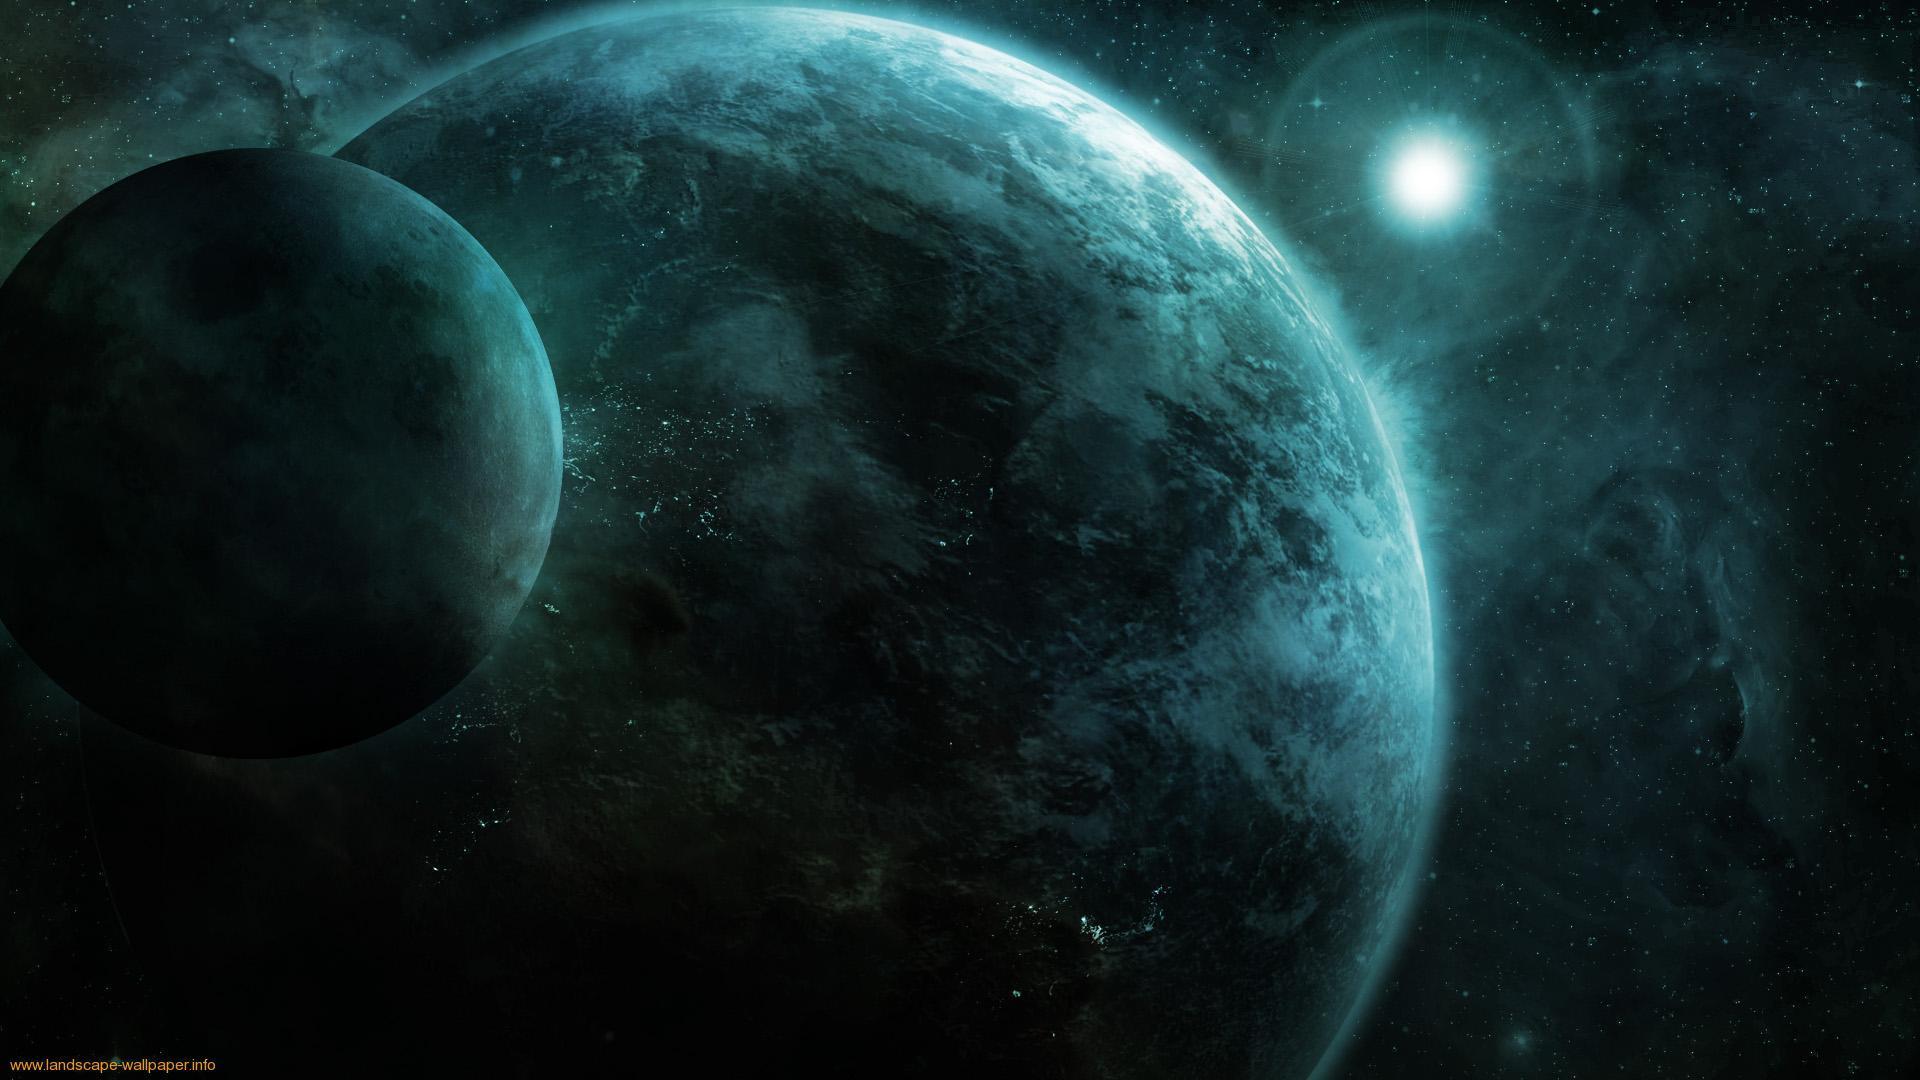 Wallpapers For > Real Space Wallpapers Hd 1920x1080